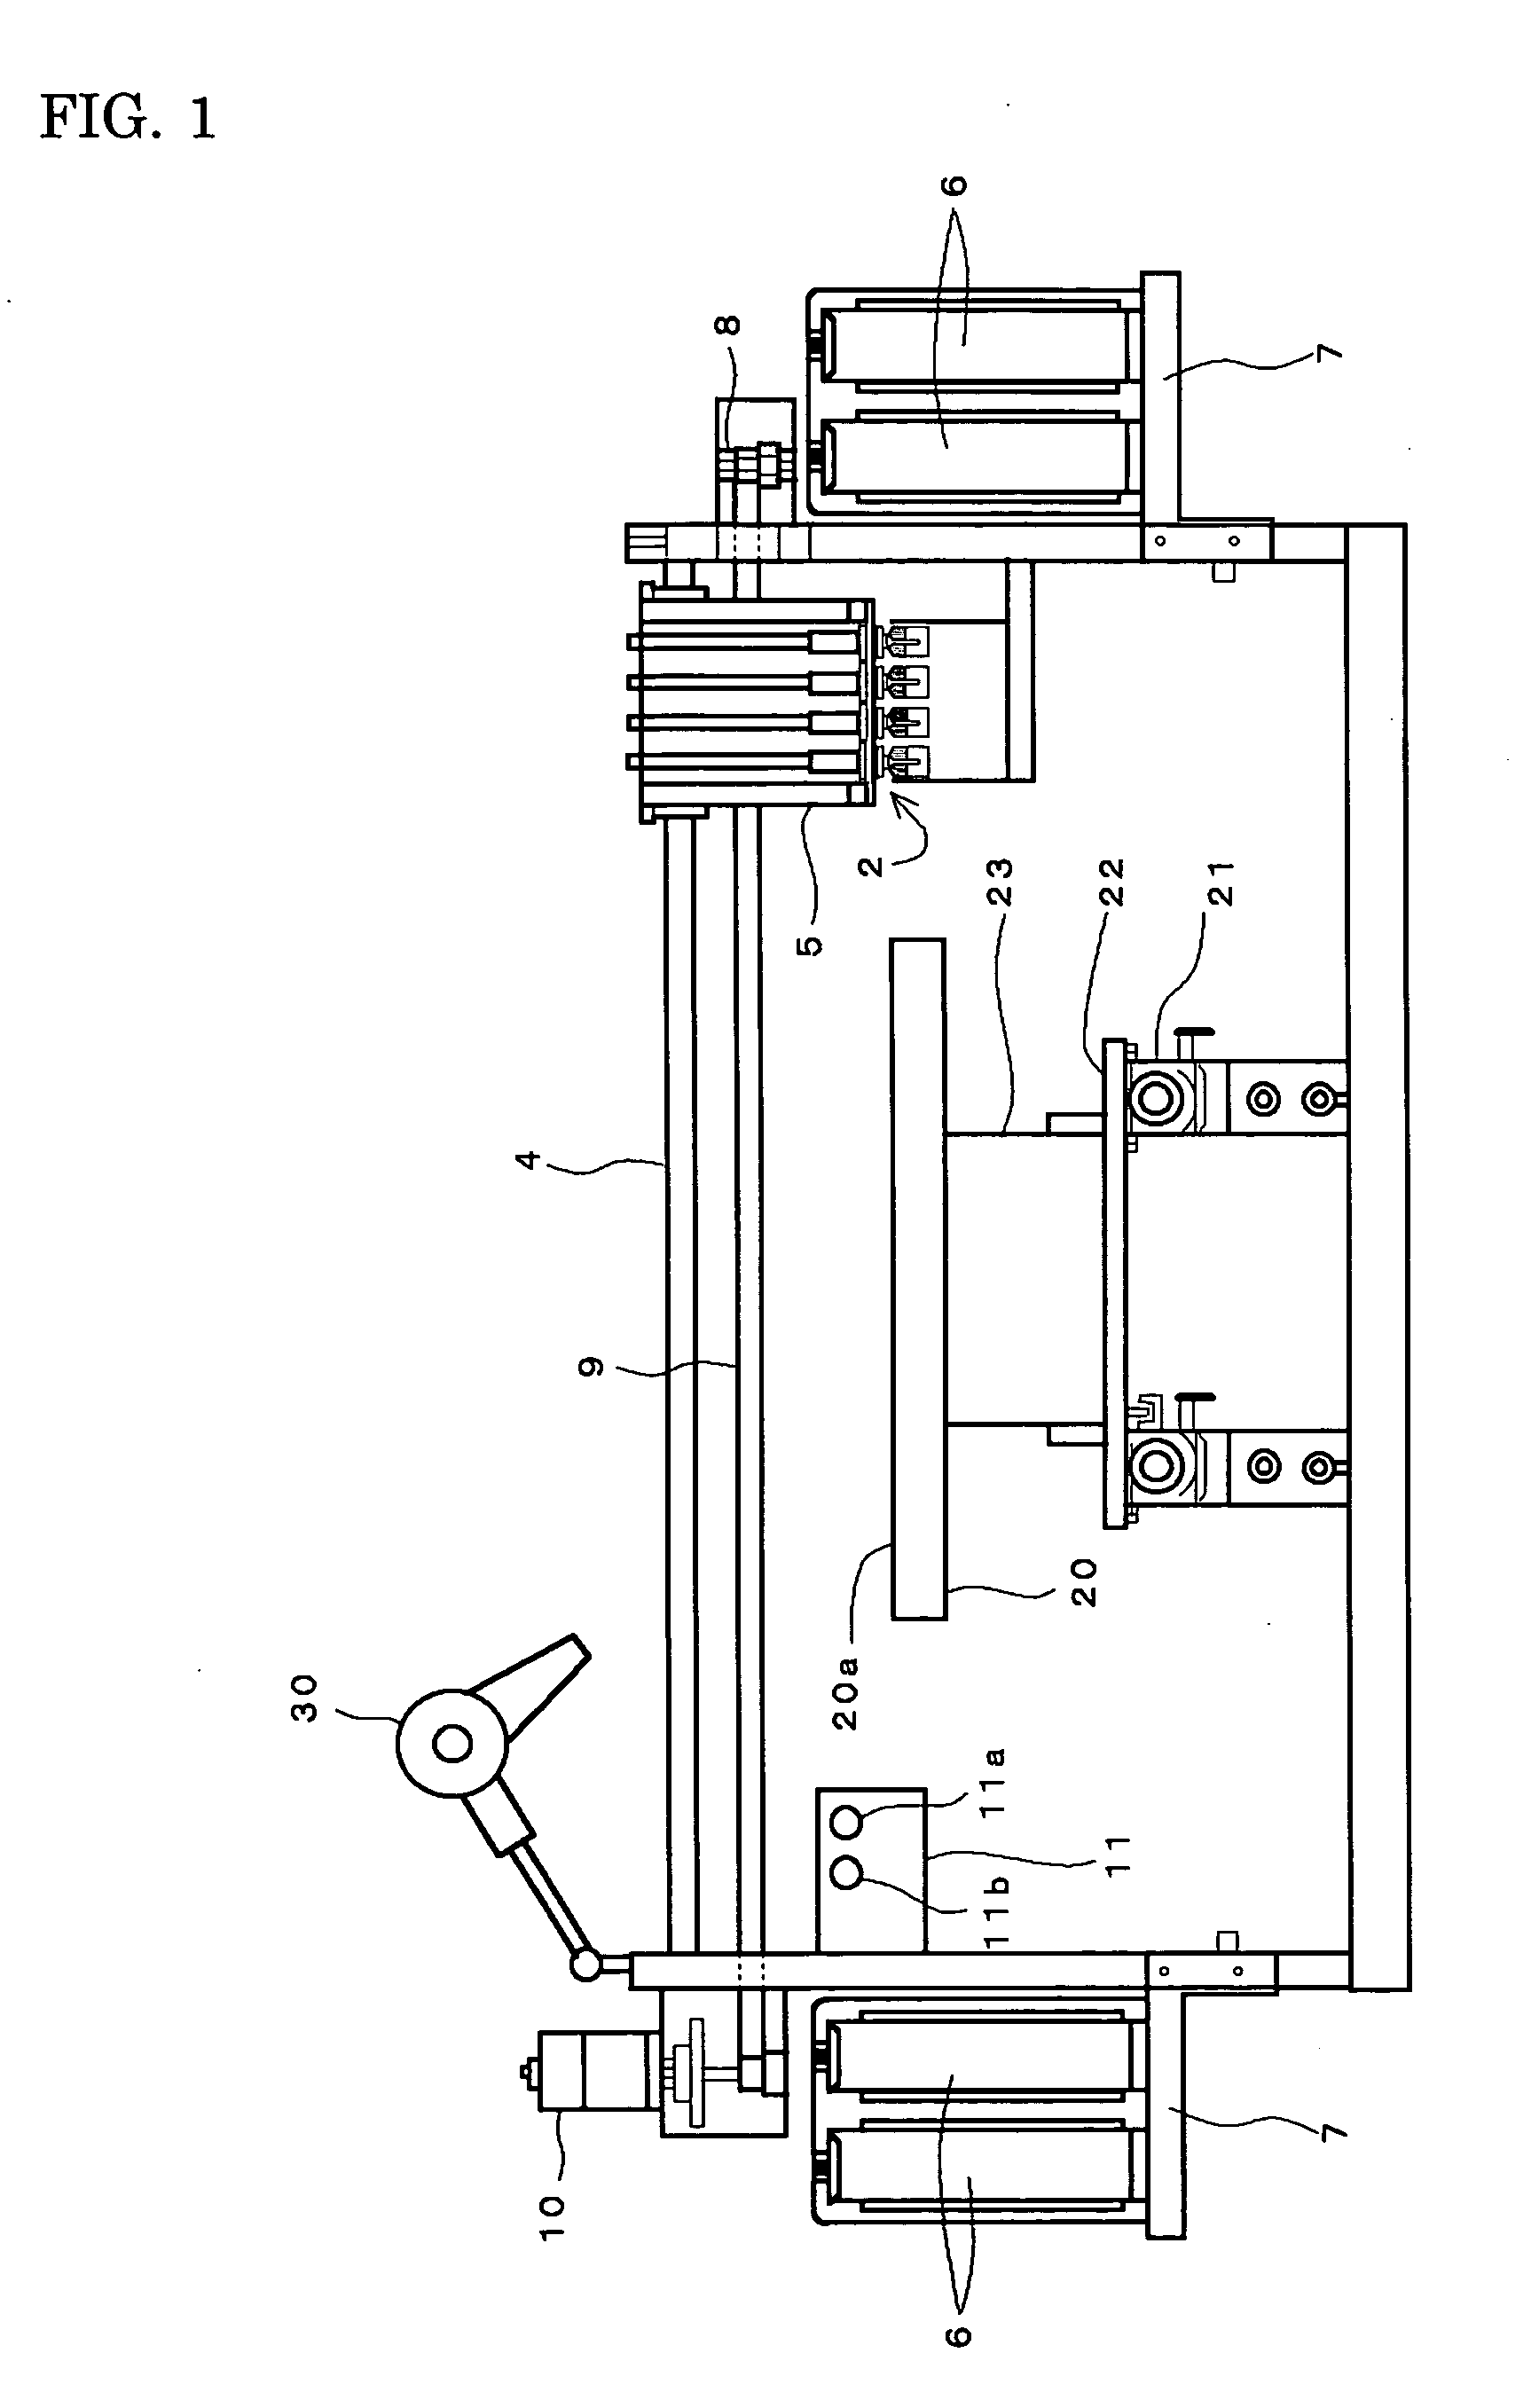 Method and apparatus for forming white inkjet images on fabric